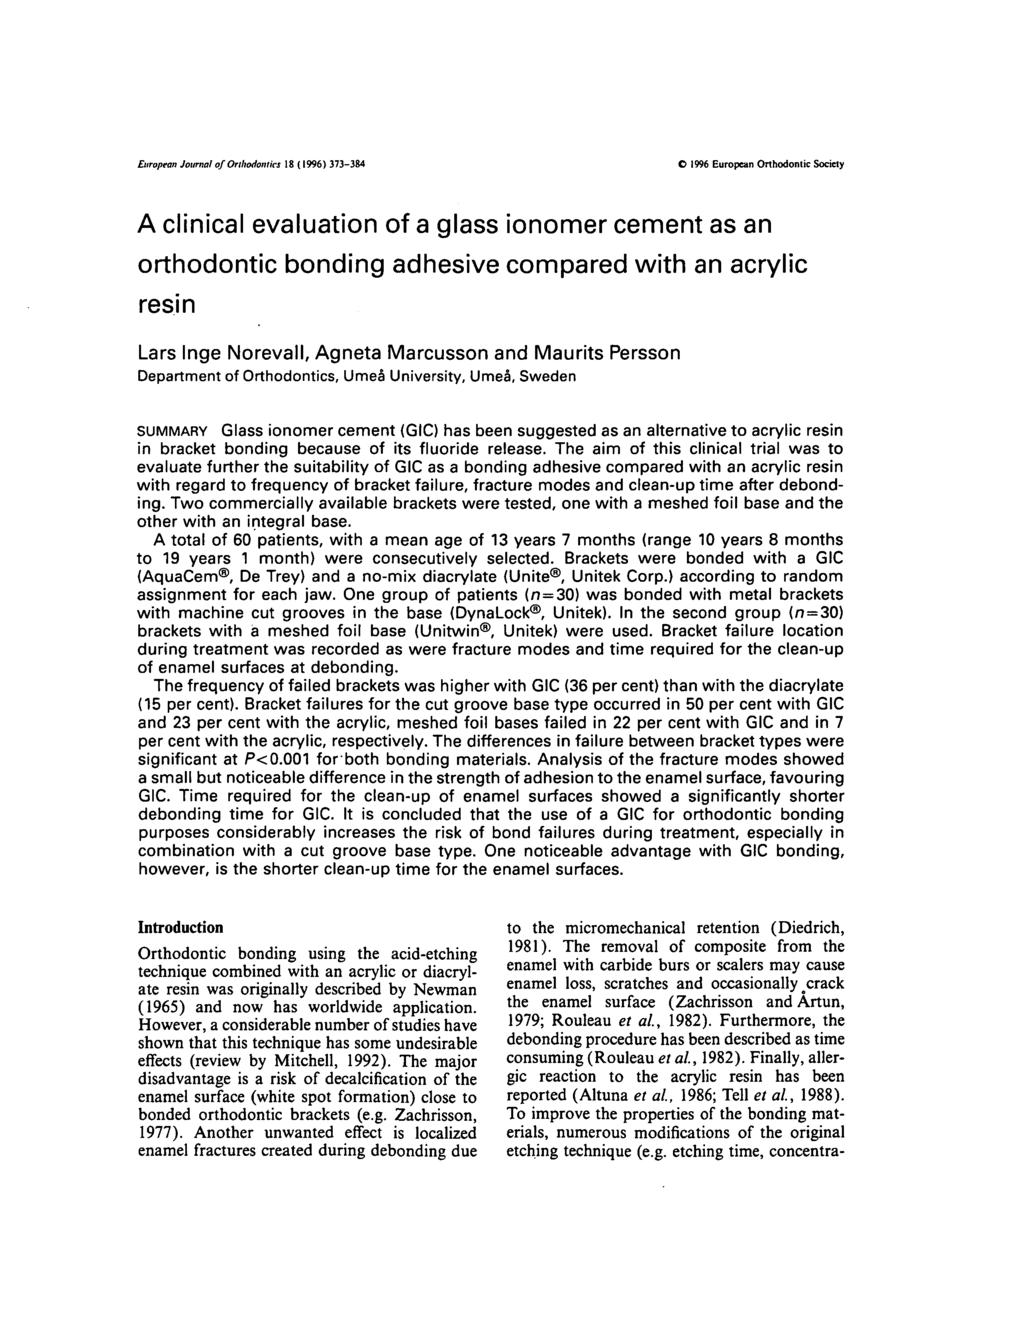 European Journal of Orthodontics 18 (1996) 373-384 O 1996 European Orthodontic Society A clinical evaluation of a glass ionomer cement as an orthodontic bonding adhesive compared with an acrylic